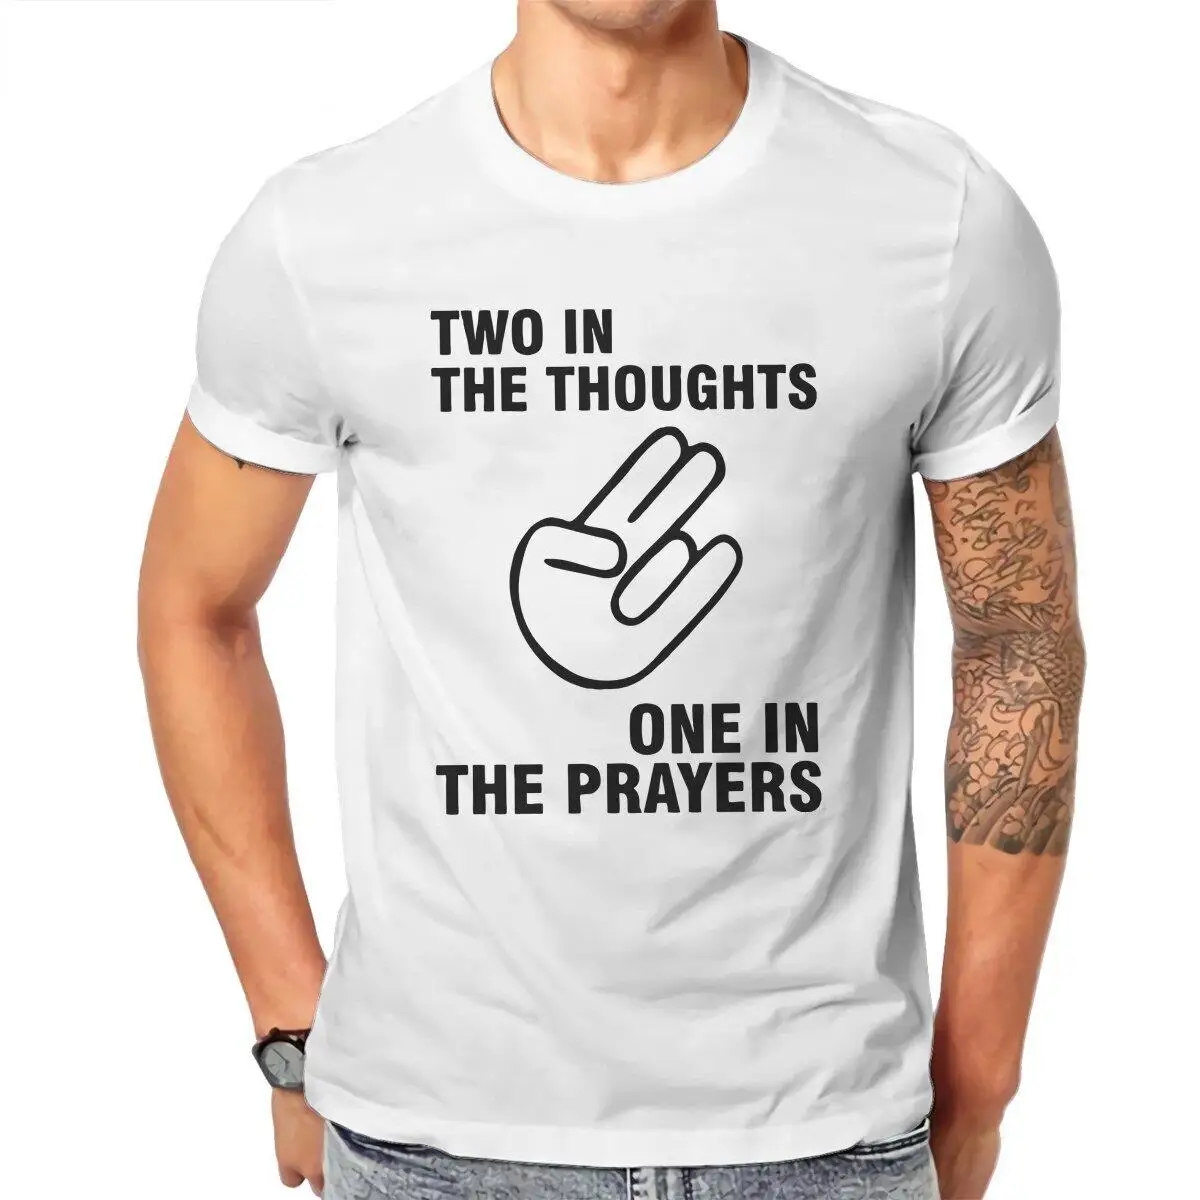 Two In The Thoughts One In The Prayers Men T Shirts Jesus Christian Tee Shirt Short Sleeve T-Shirt 100% Cotton Plus Size Tops